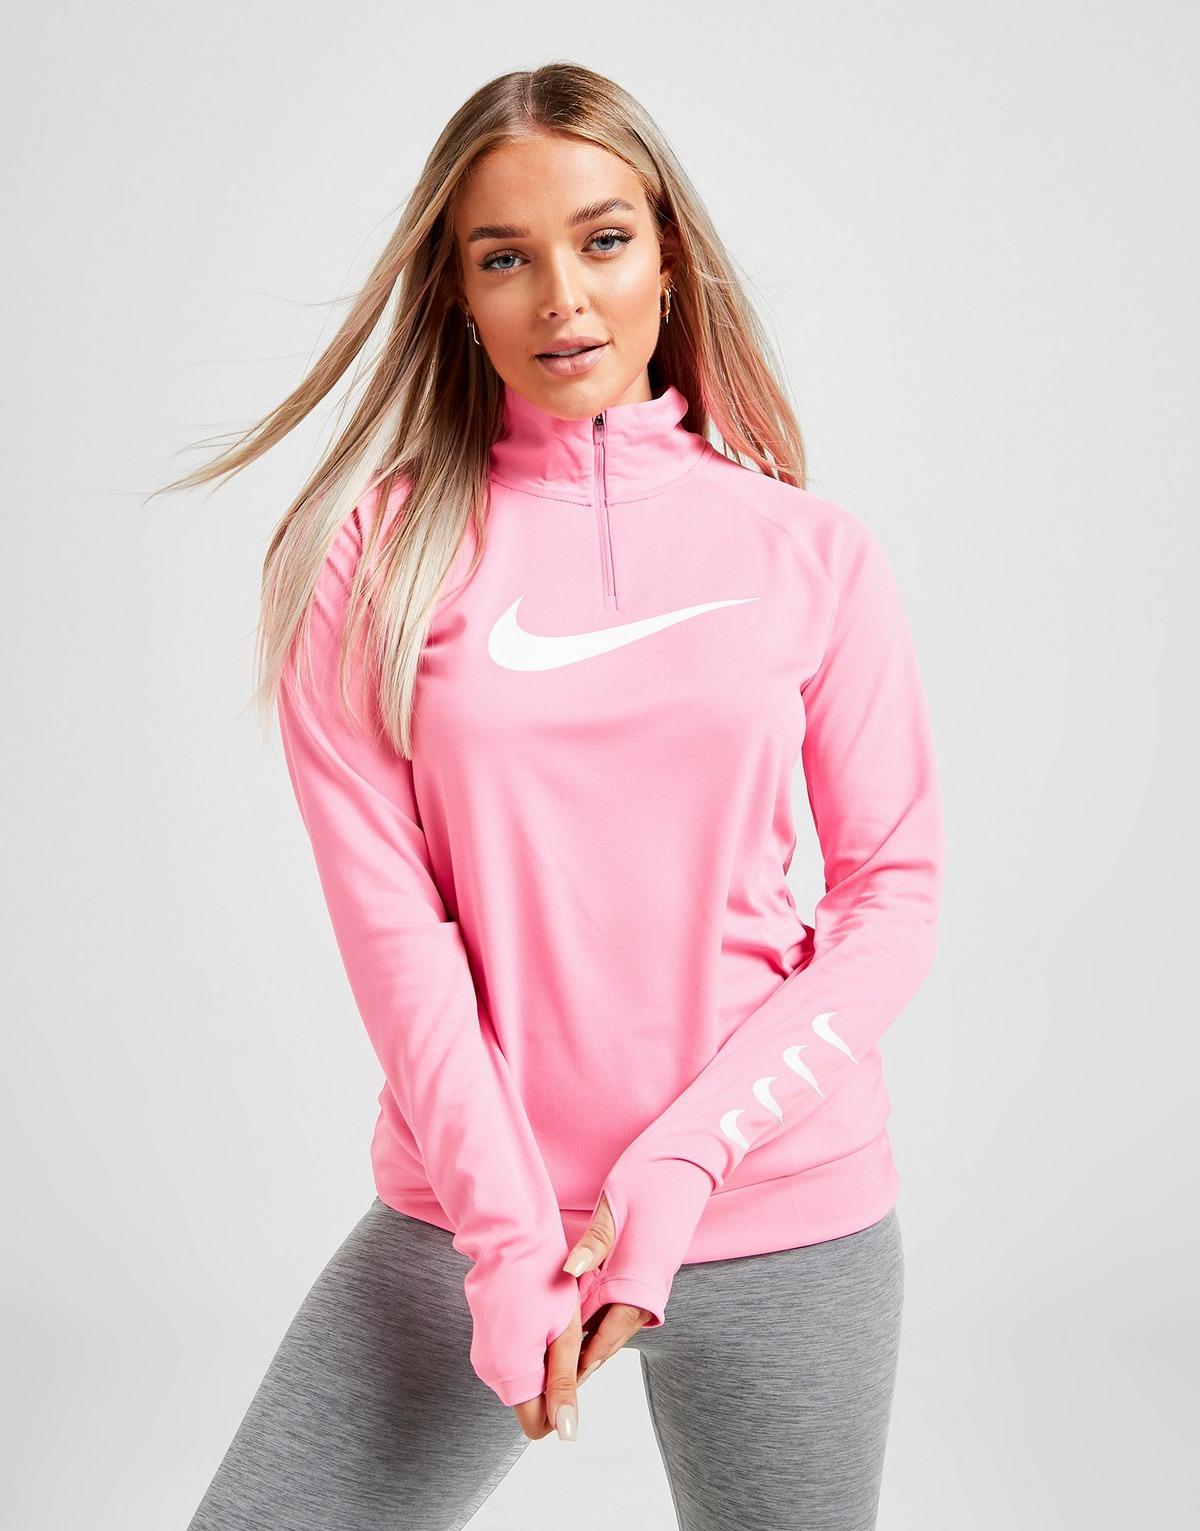 Nike Synthetic Running Repeat Swoosh 1/4 Zip Top in Pink - Lyst